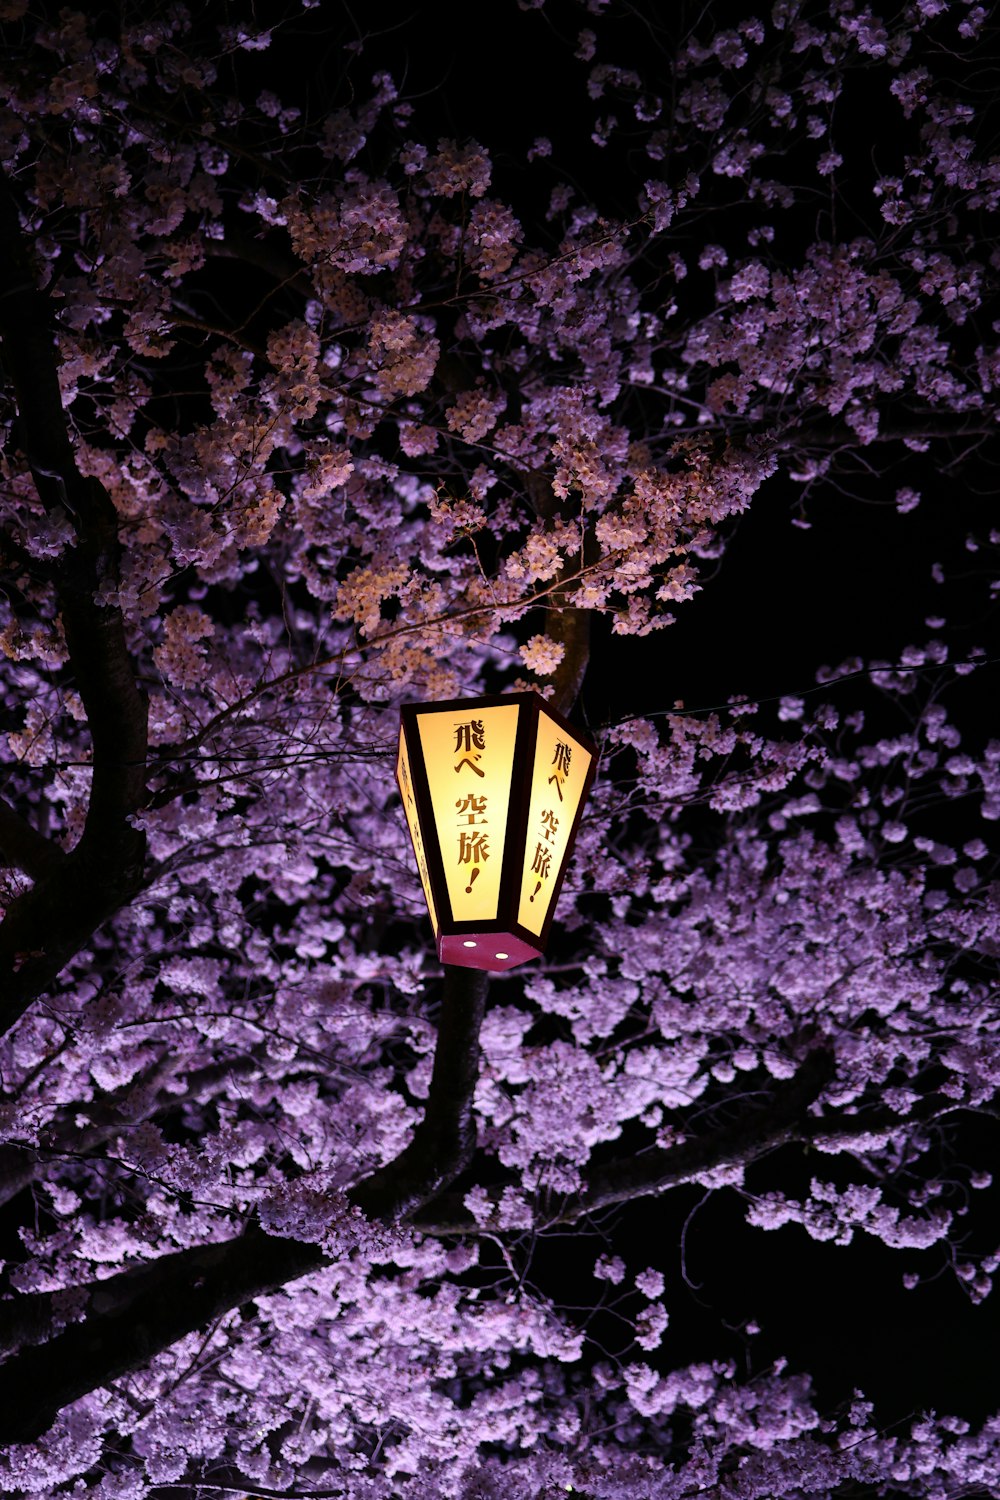 a street light in front of a blooming tree